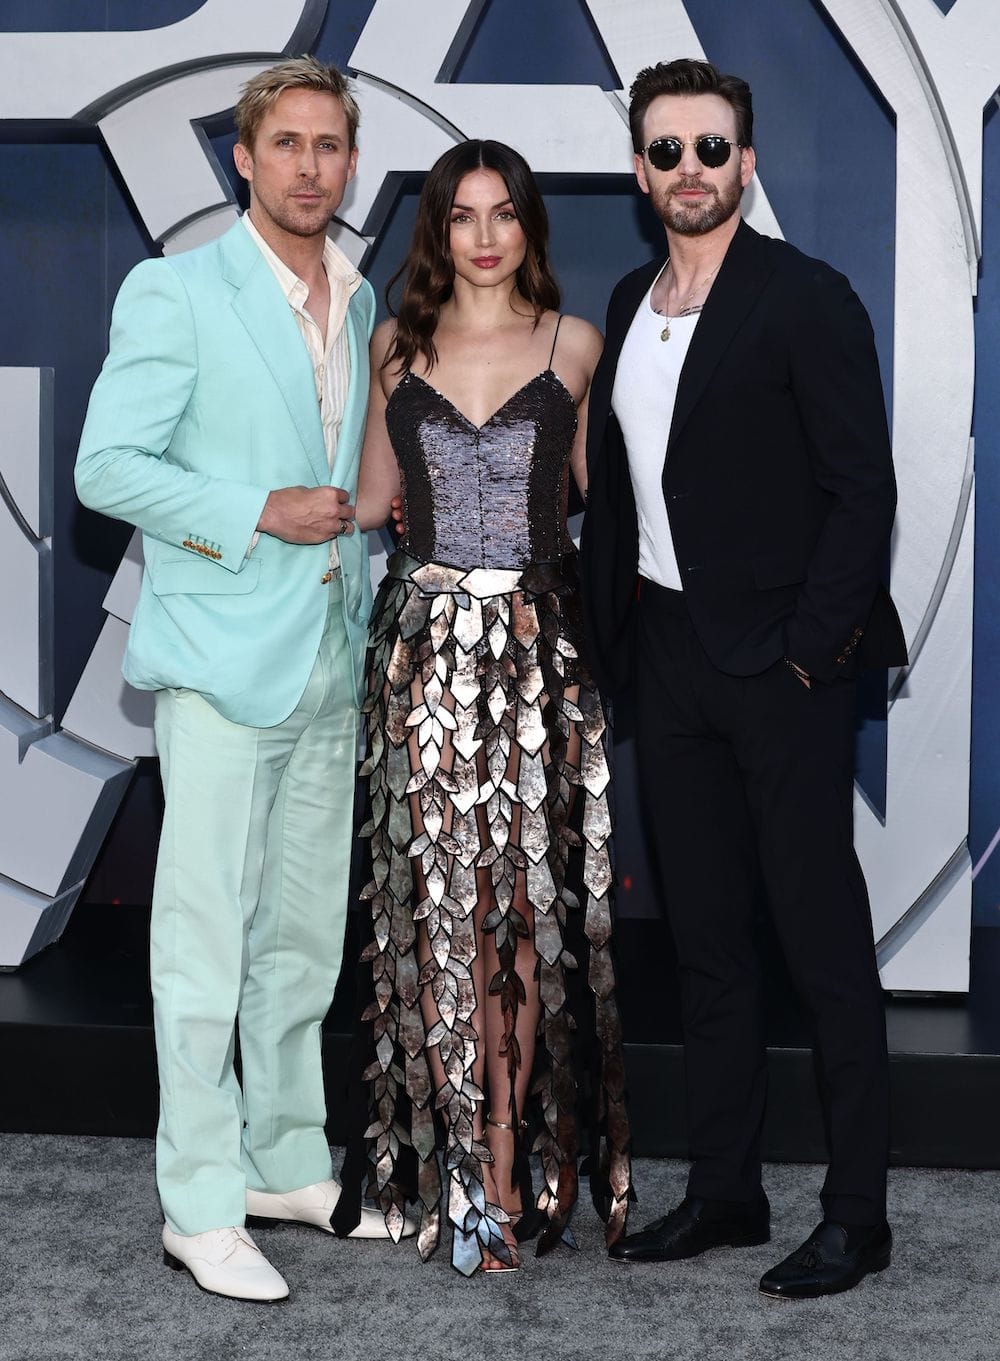 Ana de Armas with her co-stars Ryan Gosling and Chris Evans at The Gray Man Los Angeles Premiere on July 13, 2022.